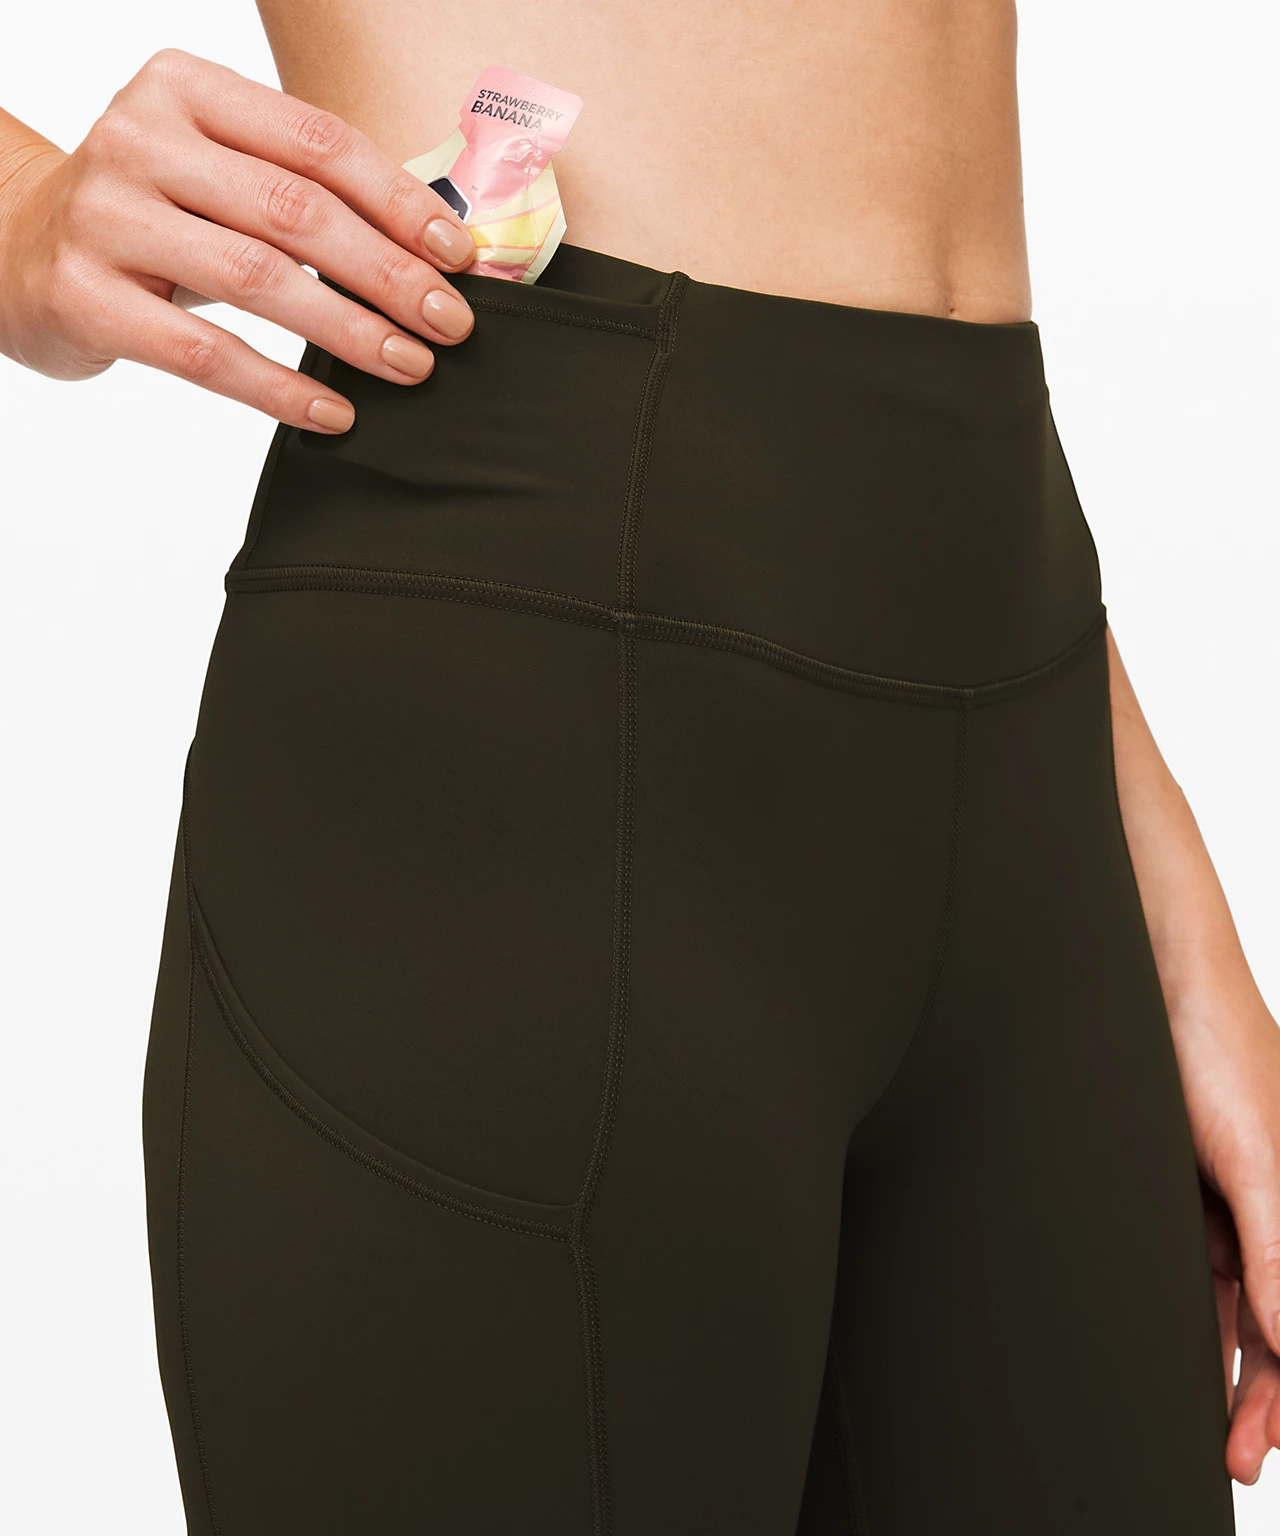 The best leggings with pockets for working out our relaxing in